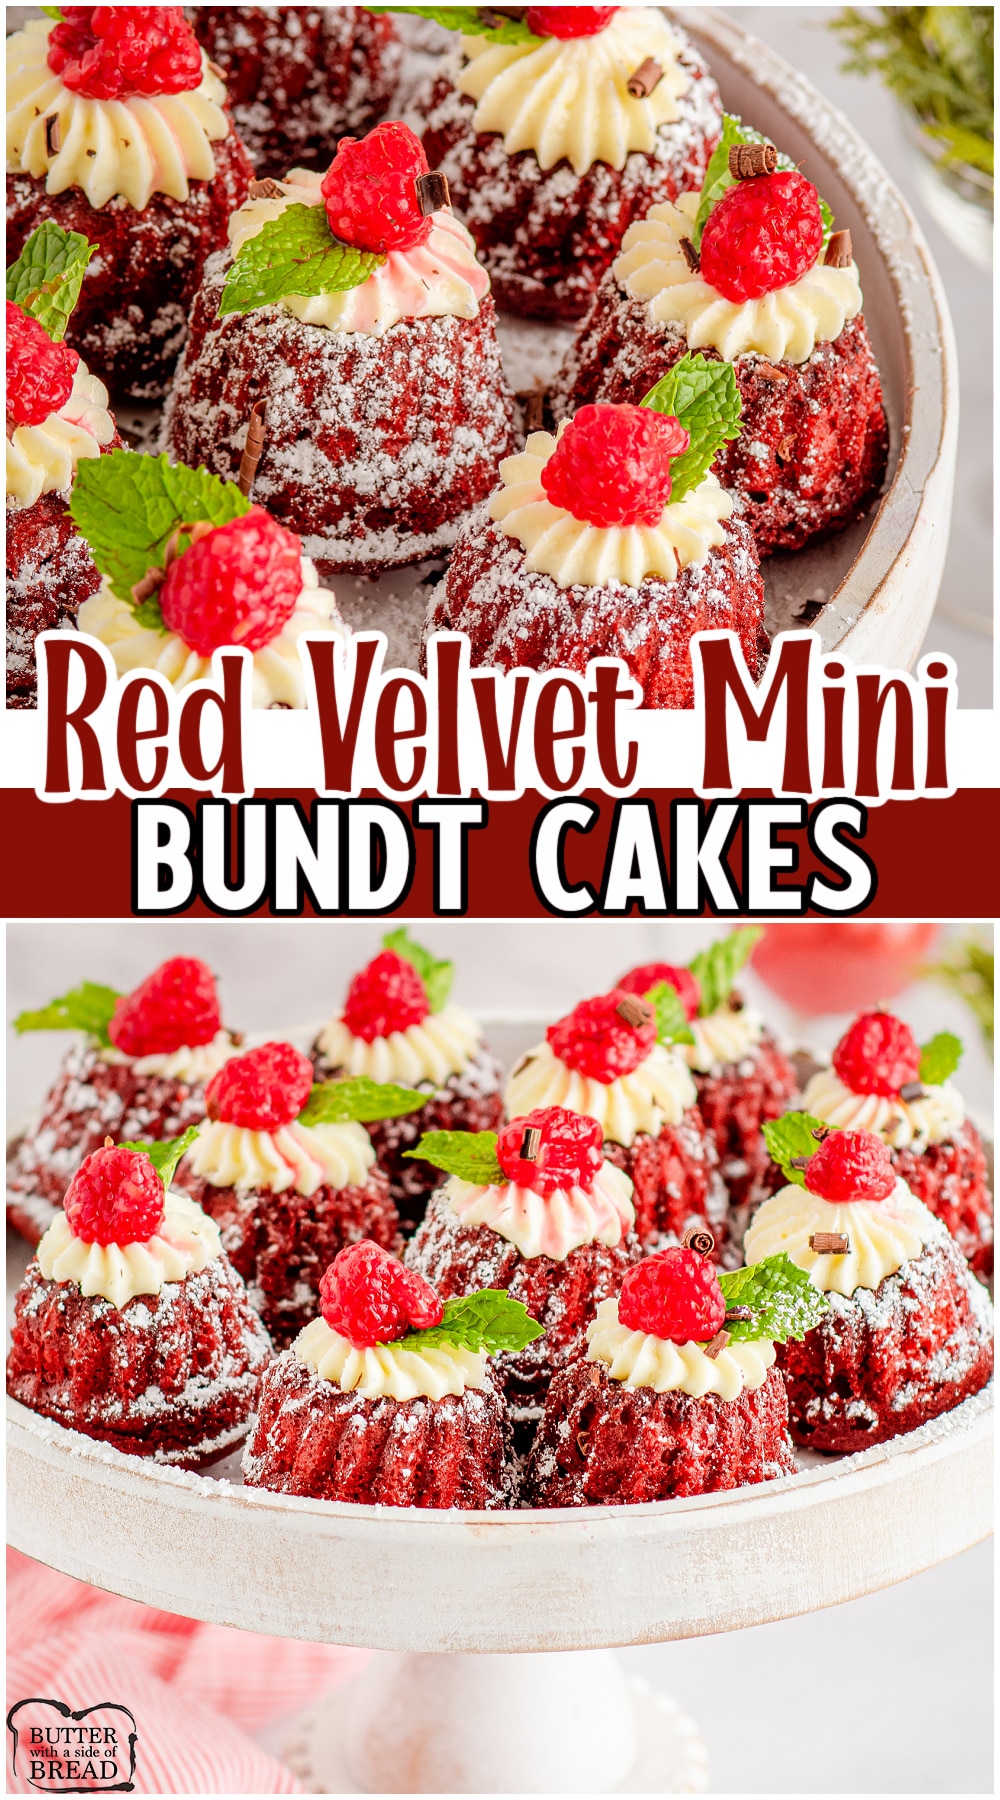 Homemade Mini Red Velvet bundt cakes are soft & flavorful, topped with cream cheese frosting & berries. Festive, gorgeous mini bundt cakes perfect for holidays, birthdays, or just because! 